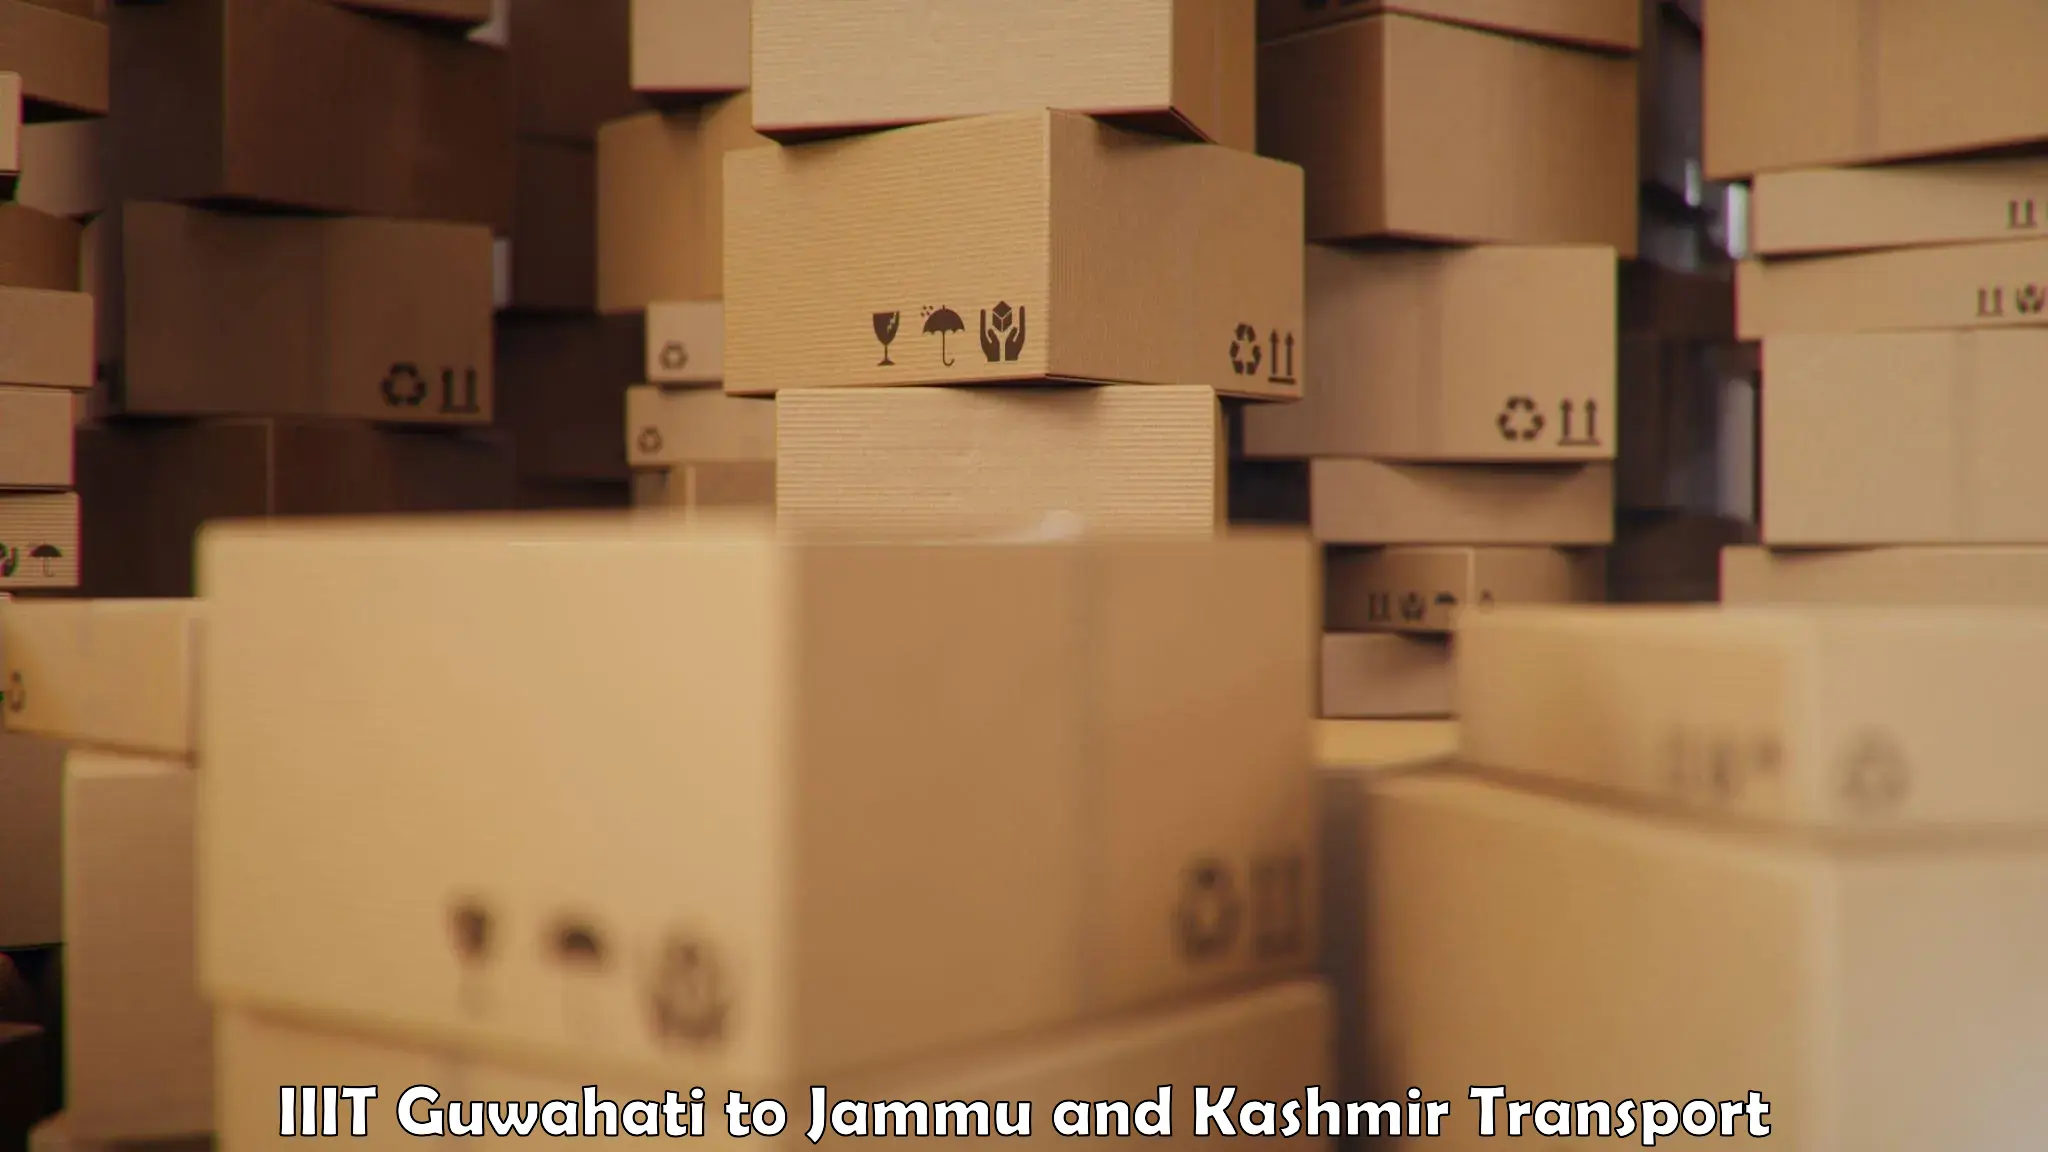 Cargo transport services in IIIT Guwahati to Pulwama